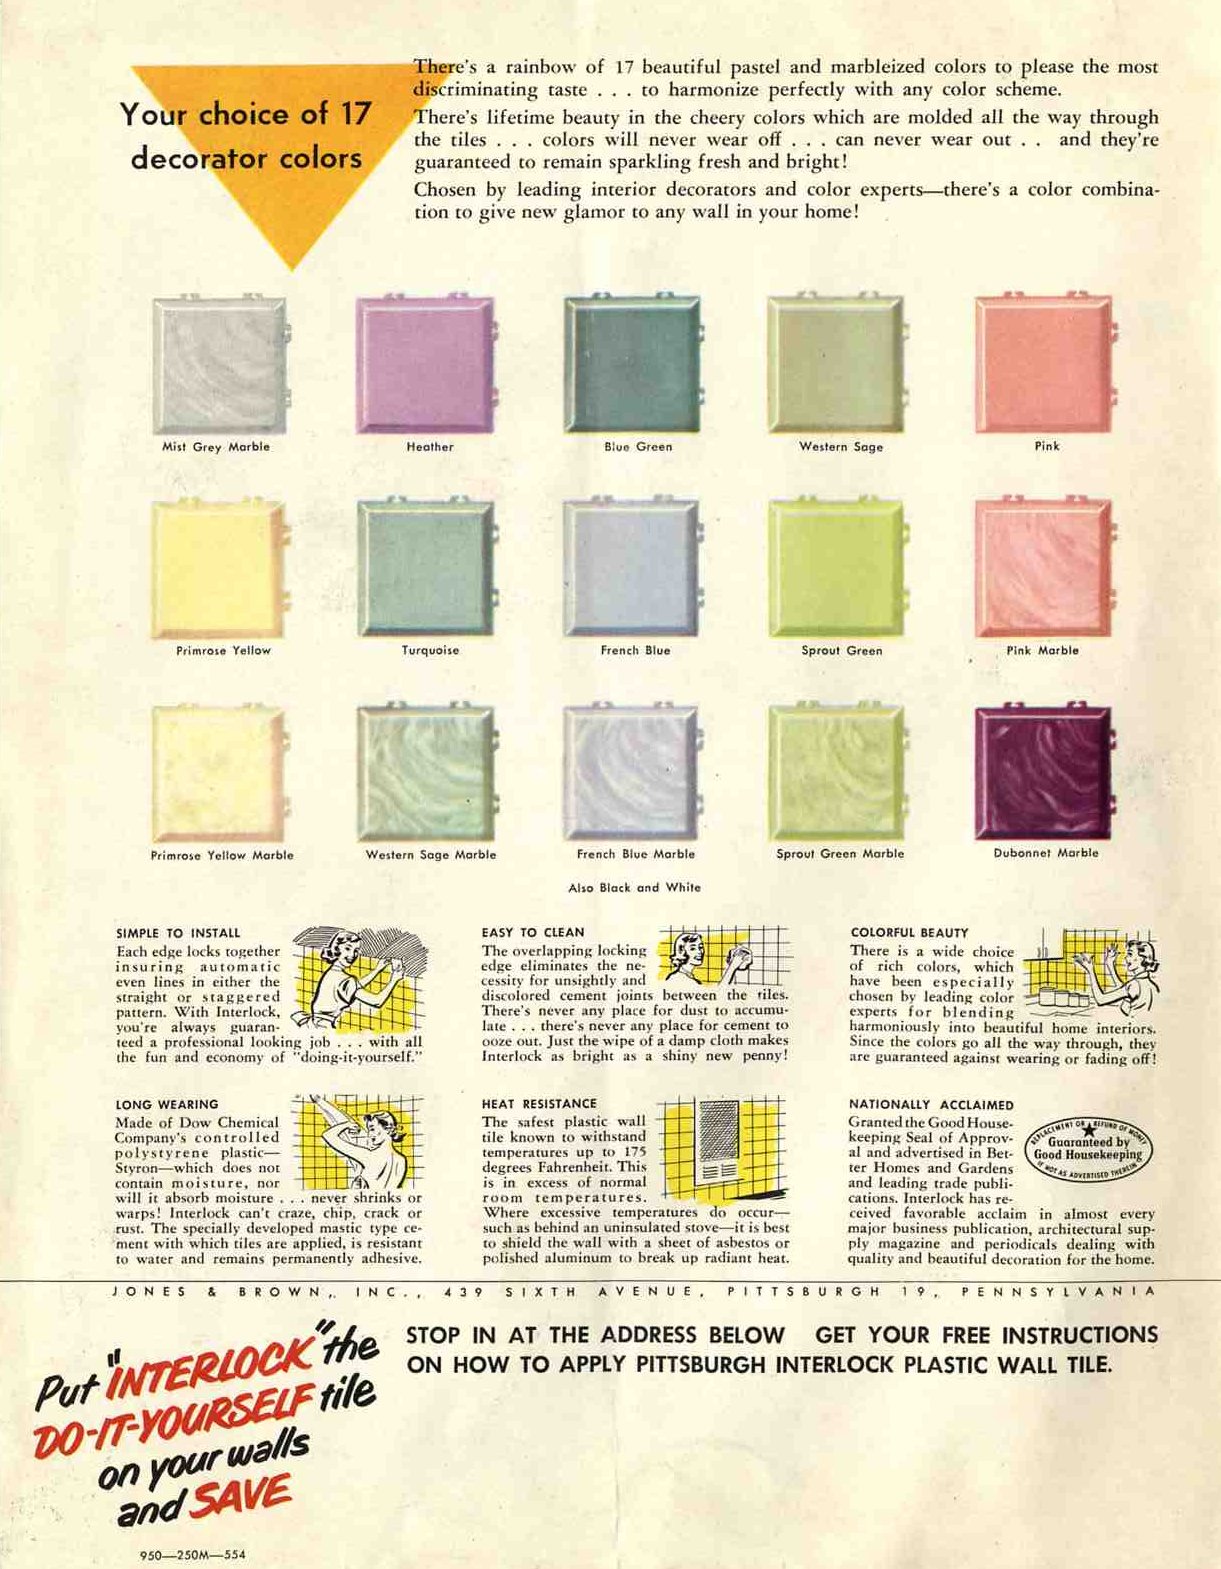 Plastic bathroom tile : 20 pages of images from 3 catalogs - Retro  title=